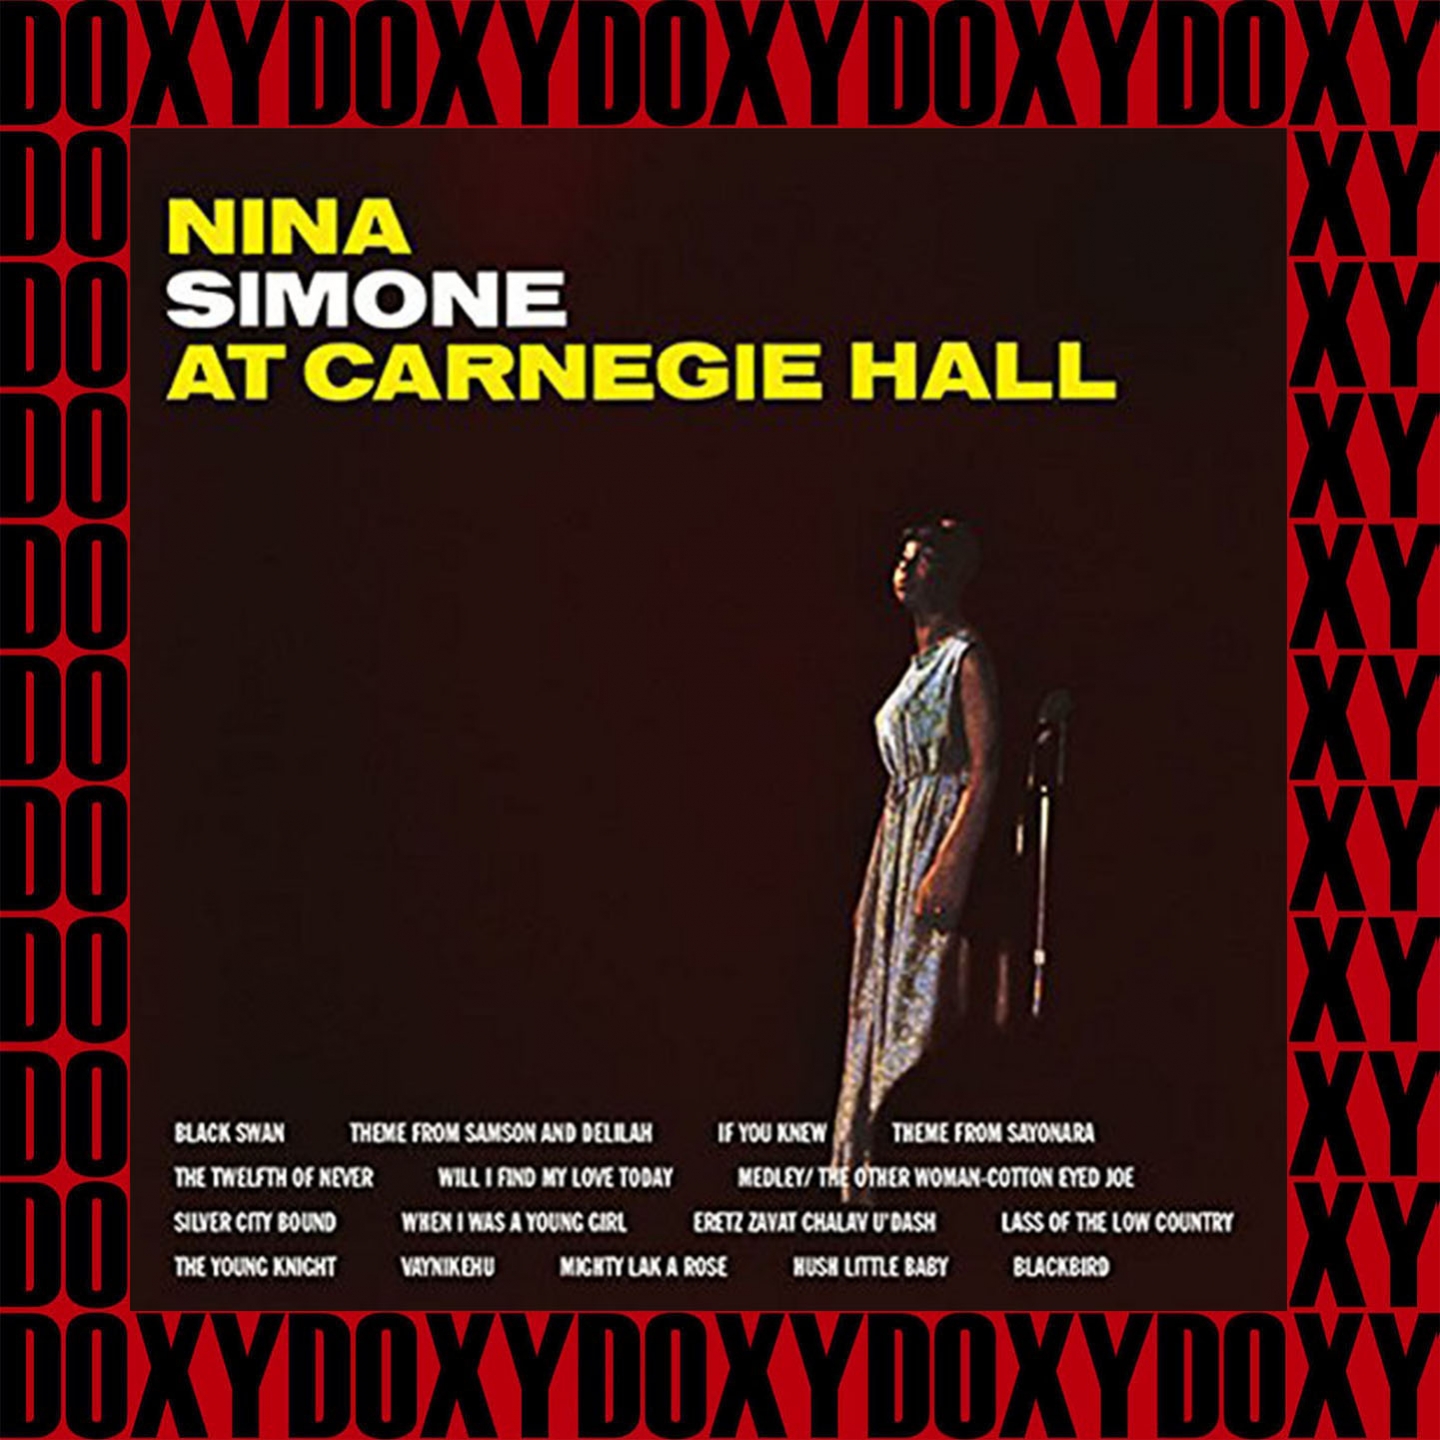 Nina Simone At Carnegie Hall (Remastered Version) (Doxy Collection)